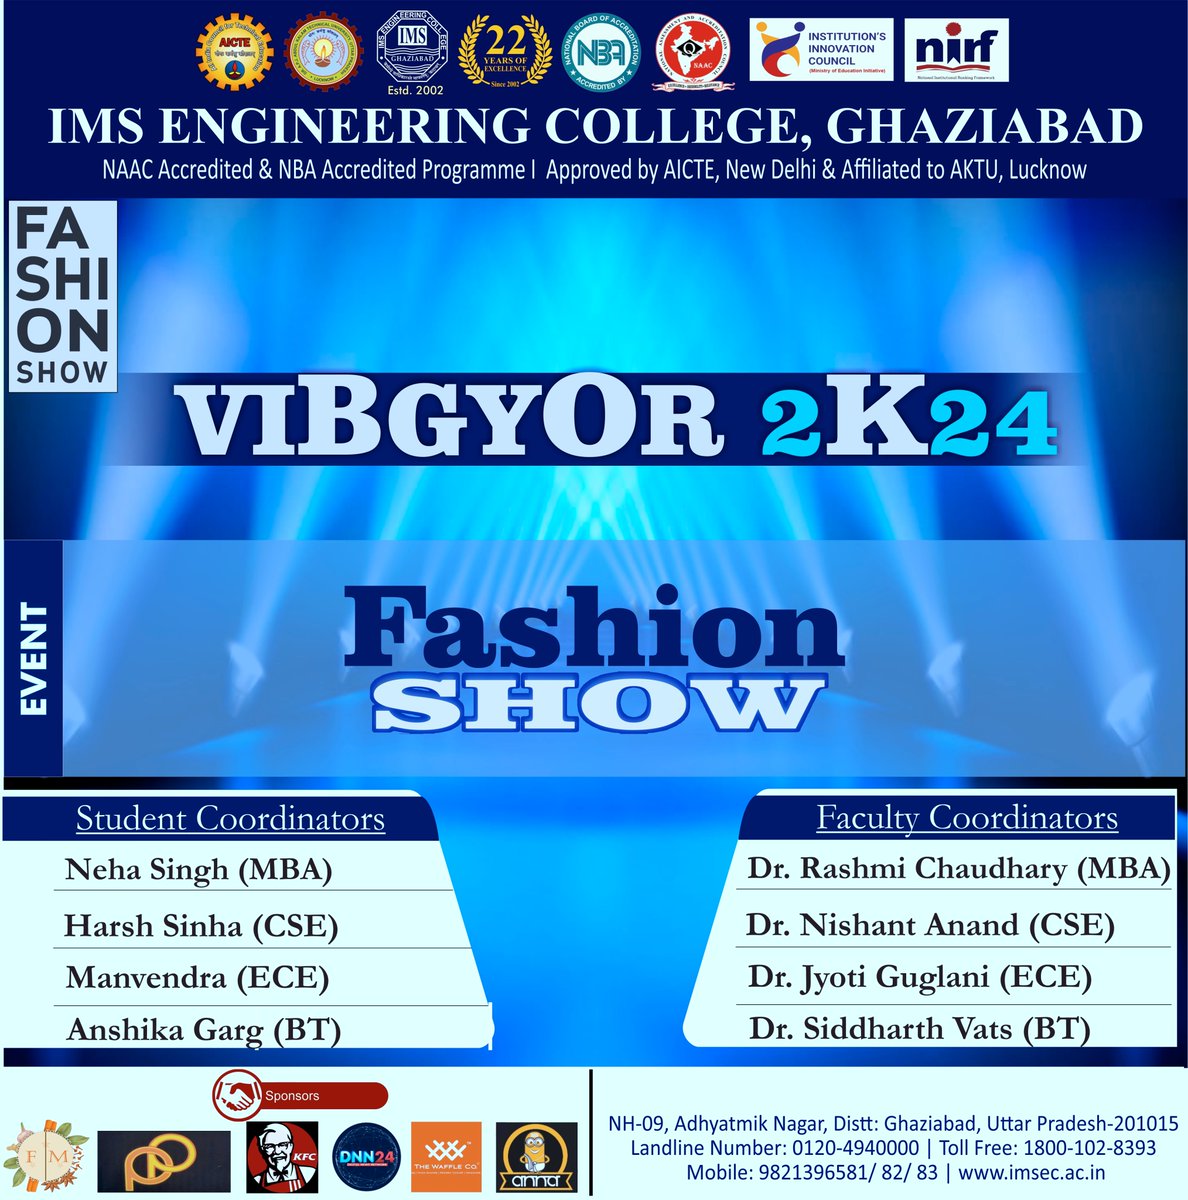 'Strike a pose and own the runway at Vibgyor 2K24! Join our departmental fashion battle where creativity meets style. Get ready to showcase your  flair and passion for fashion!'
.
.
.
#imsec143 #engineering #college #MegaFest #djnight #fashion #fashionaddict #style